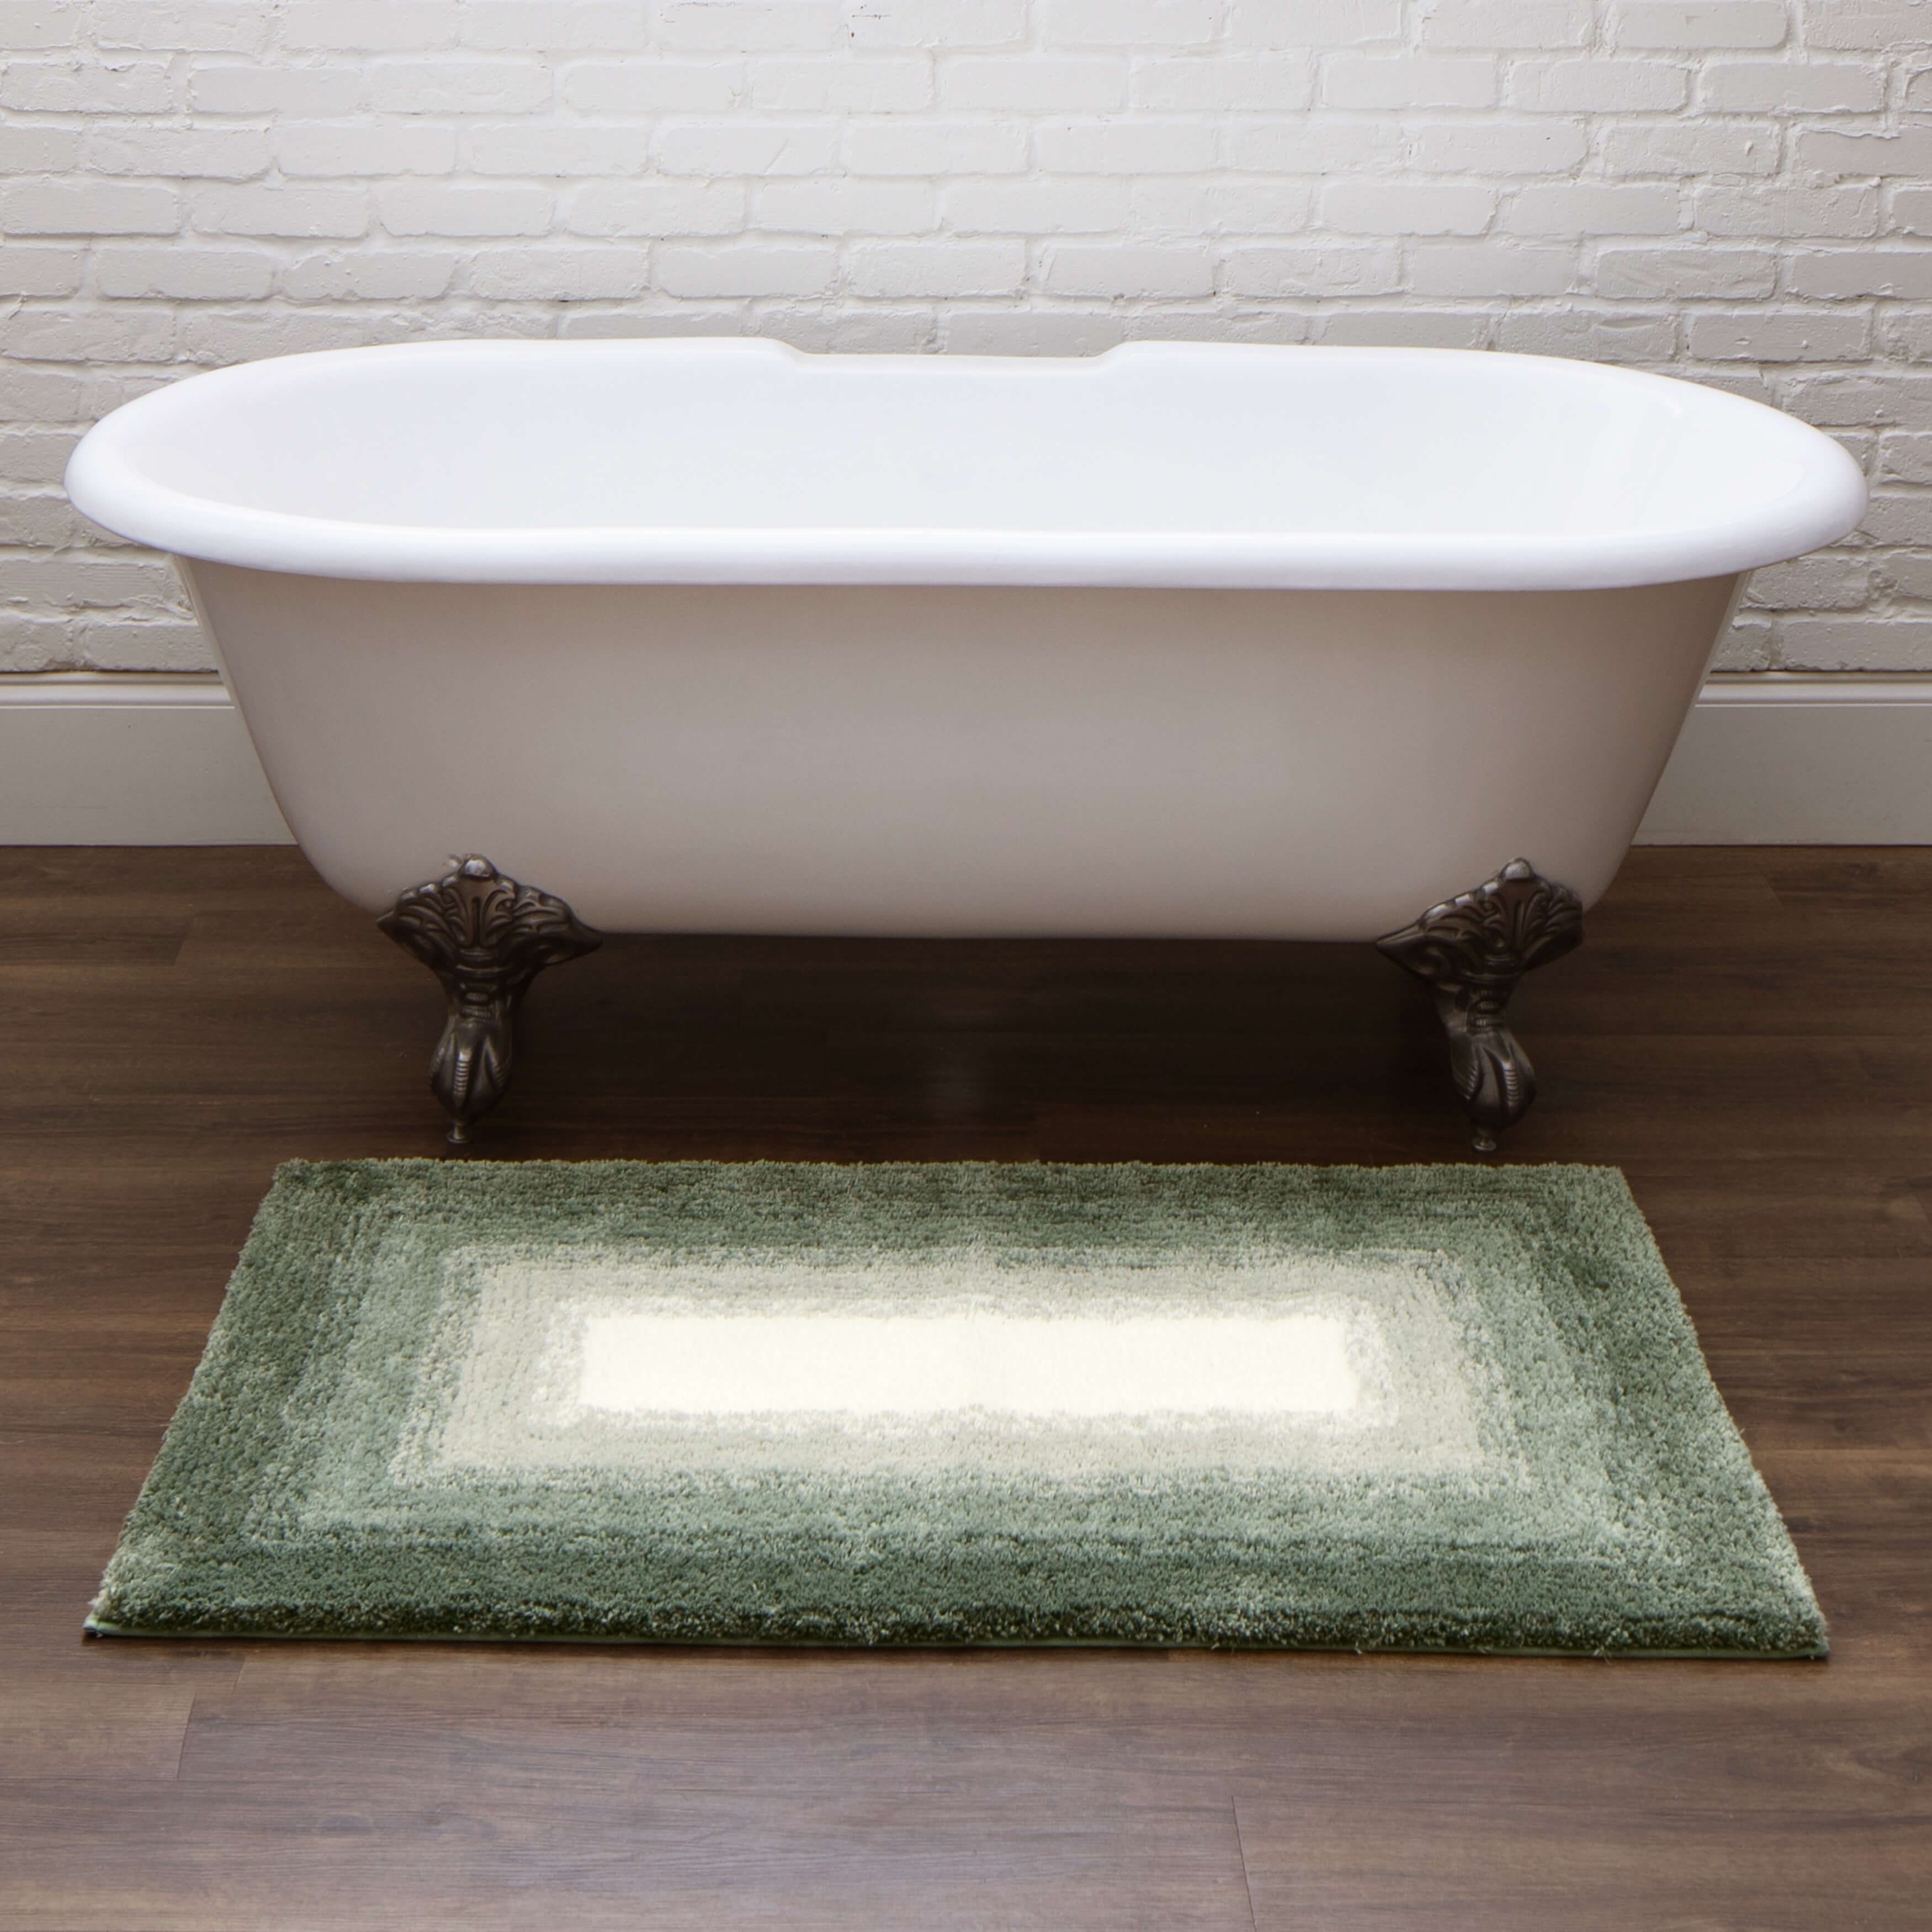 https://ak1.ostkcdn.com/images/products/is/images/direct/be834d3bd8e6cad77aa504759b1691c849e7c89f/Mohawk-Home-Ombre-Border-Bath-Rug.jpg